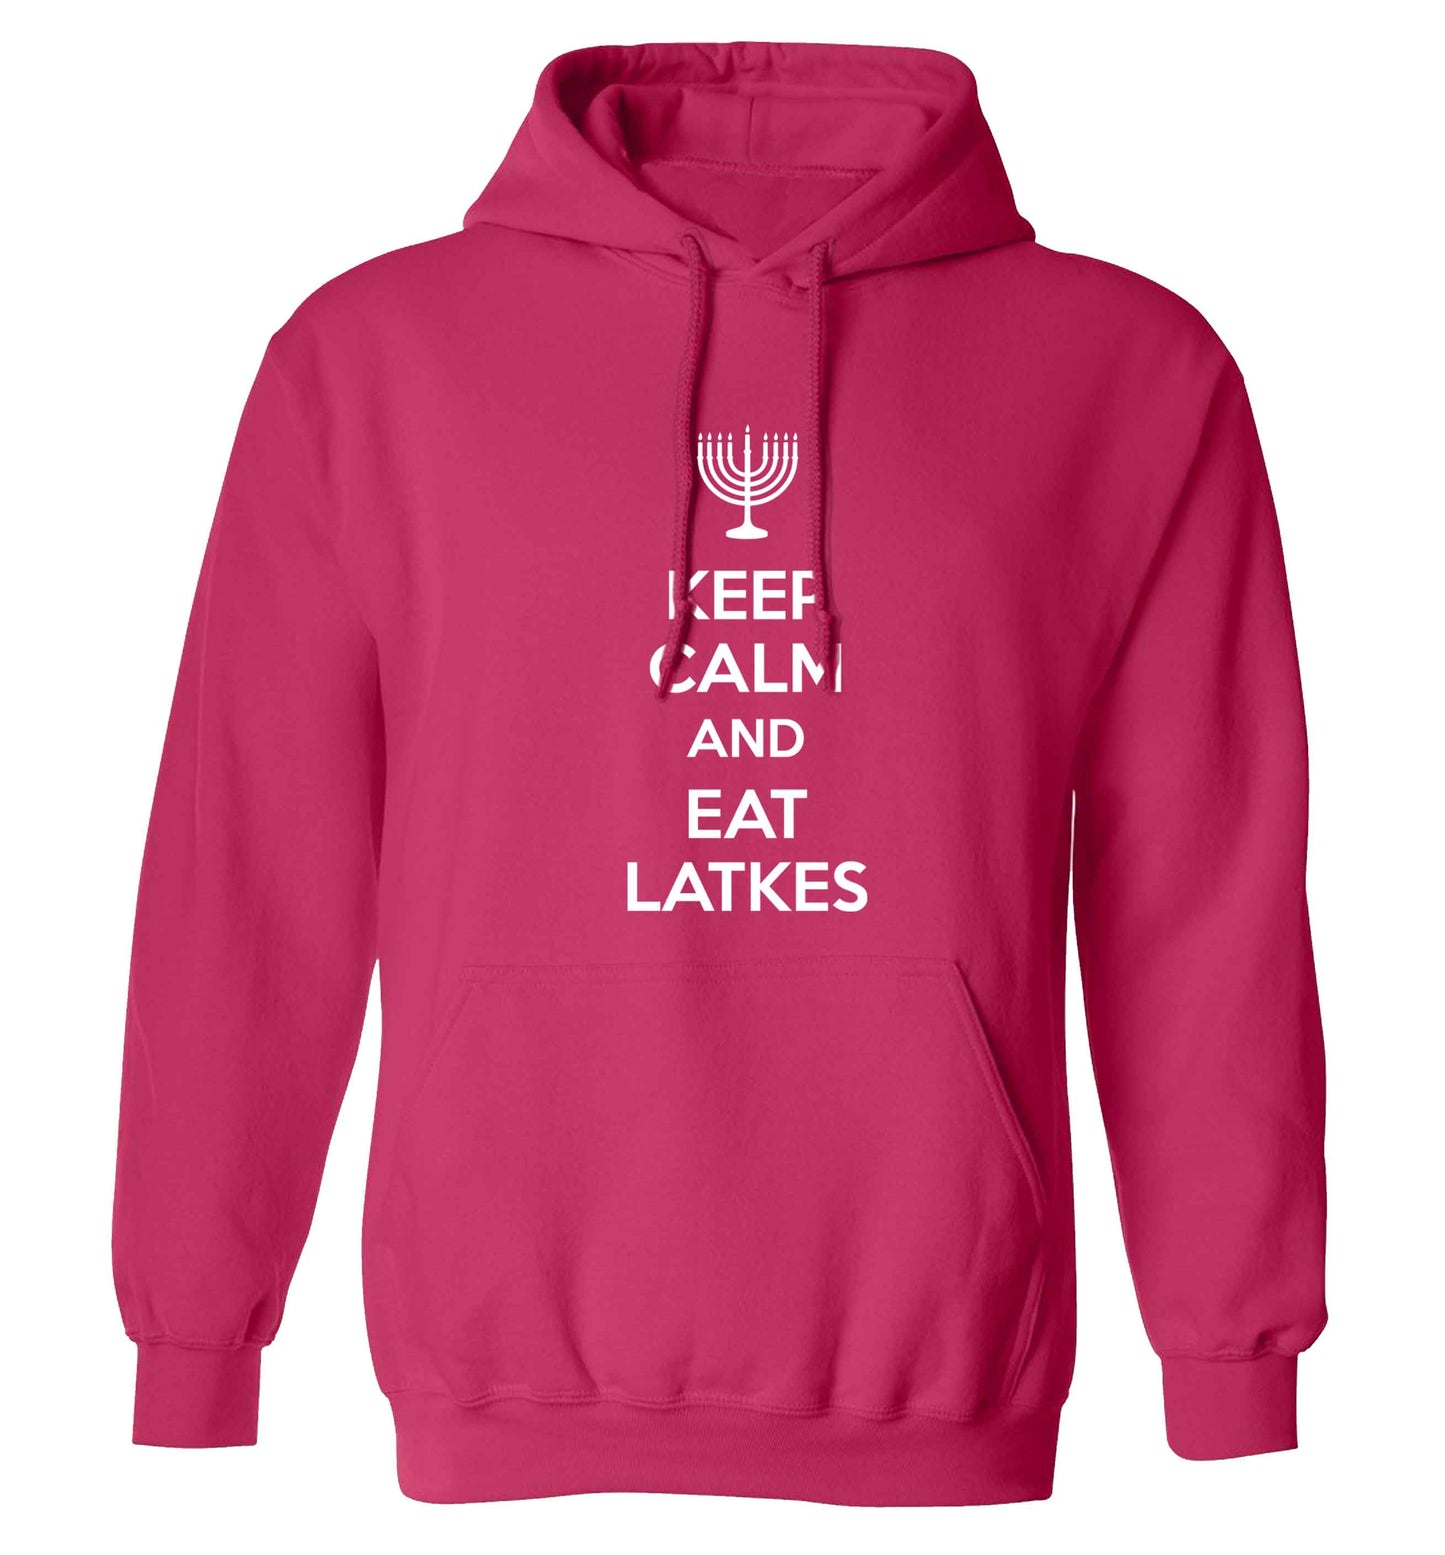 Keep calm and eat latkes adults unisex pink hoodie 2XL